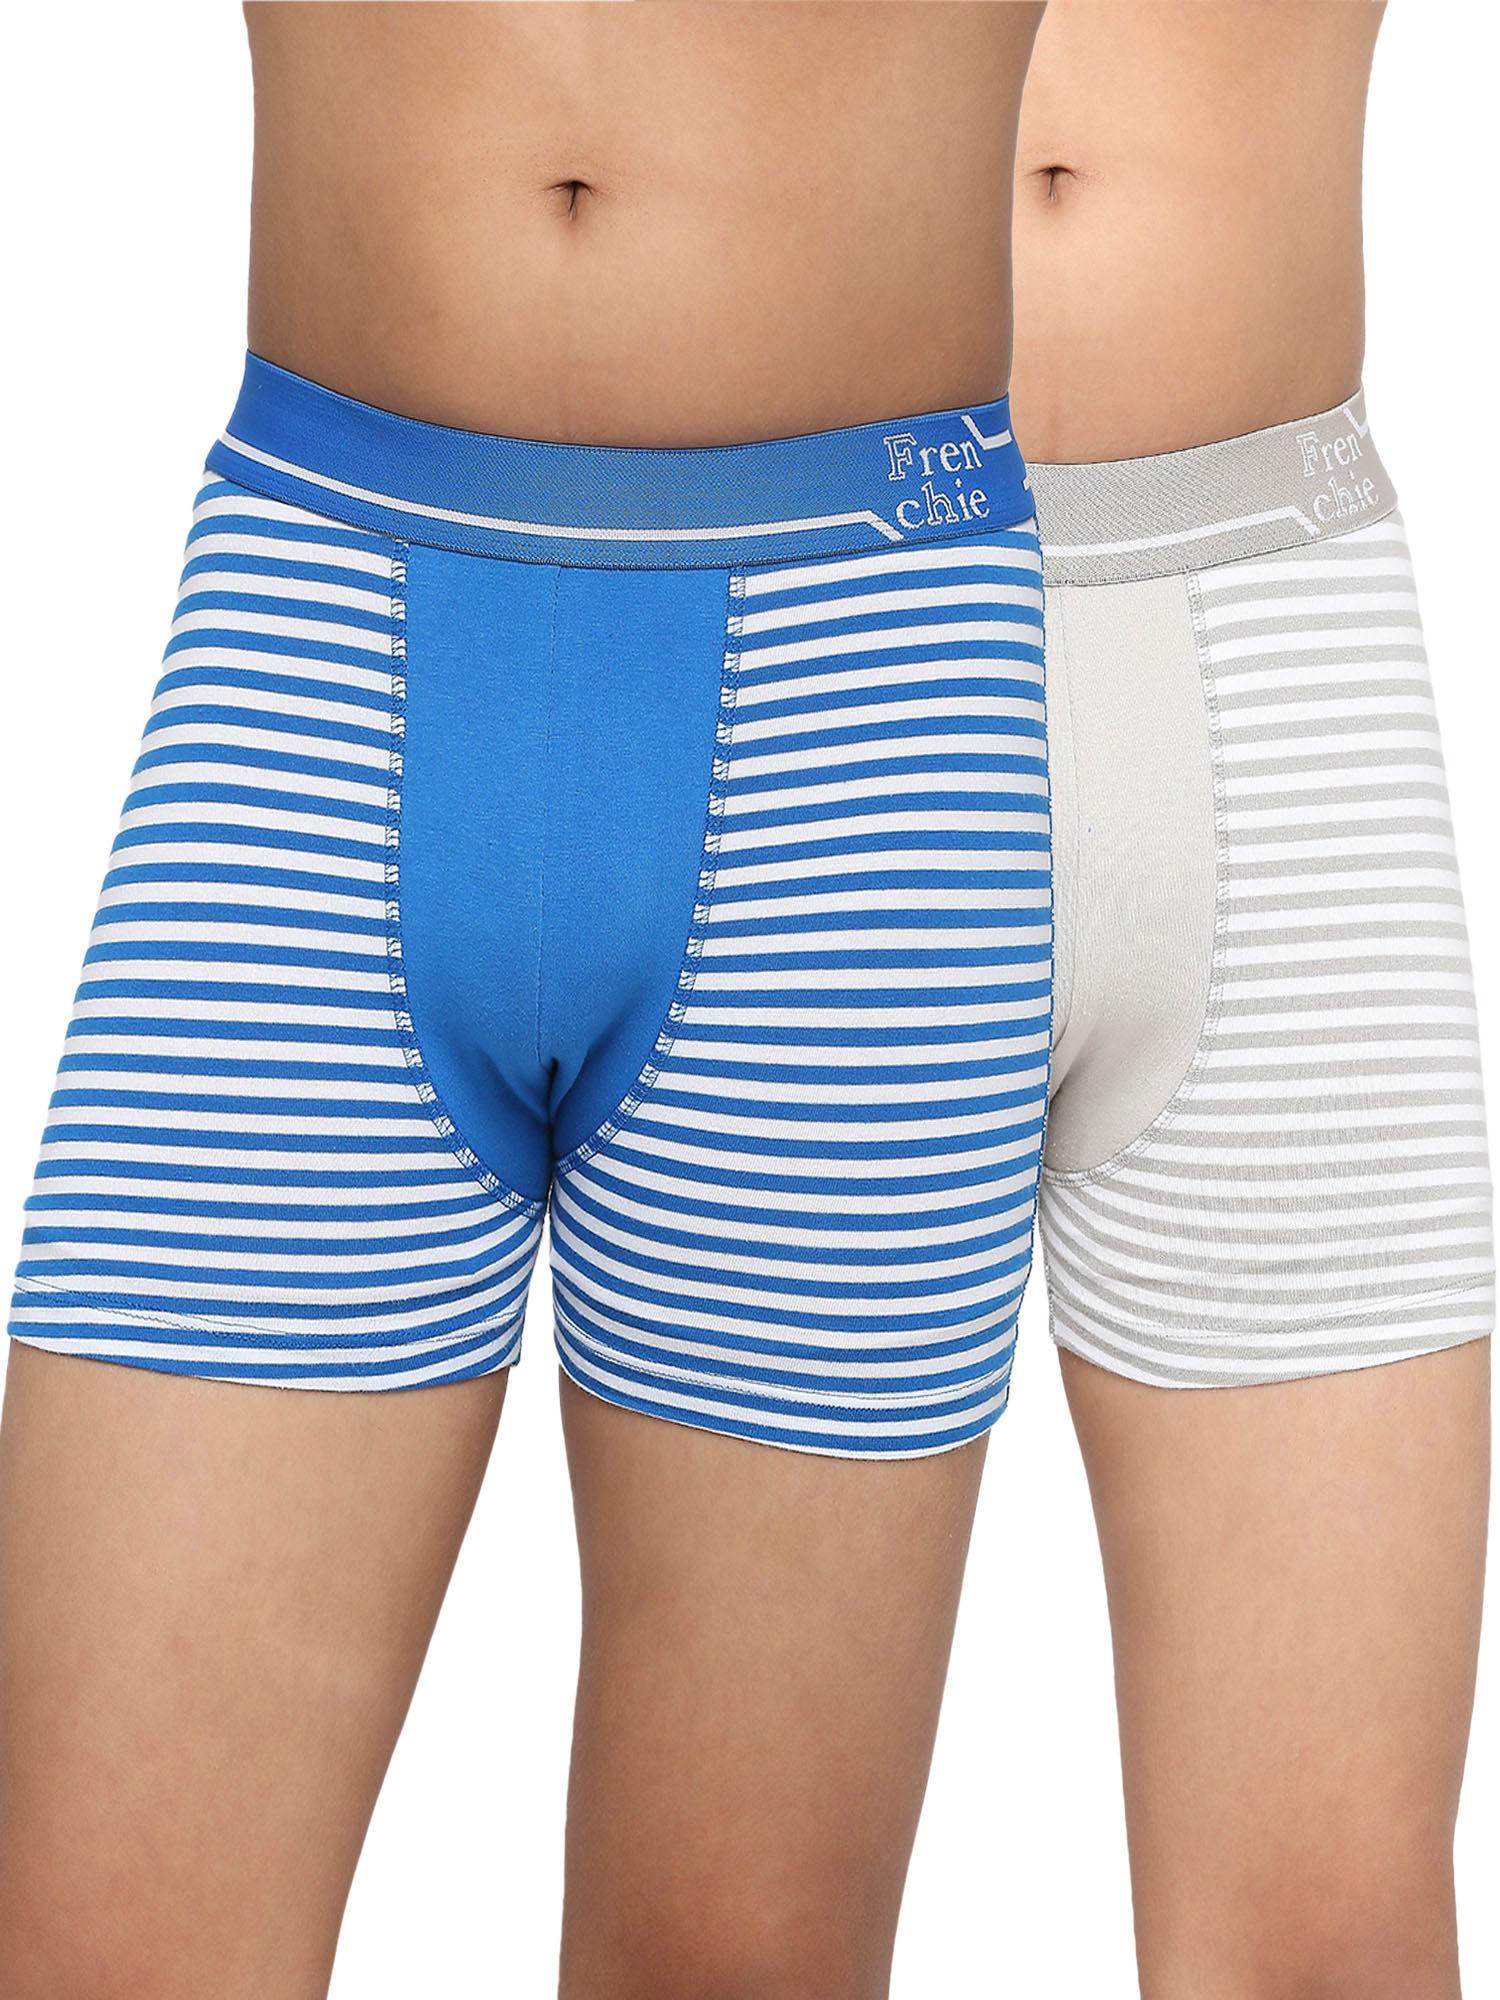 teenagers-cotton-trunk-grey-and-blue-(pack-of-2)